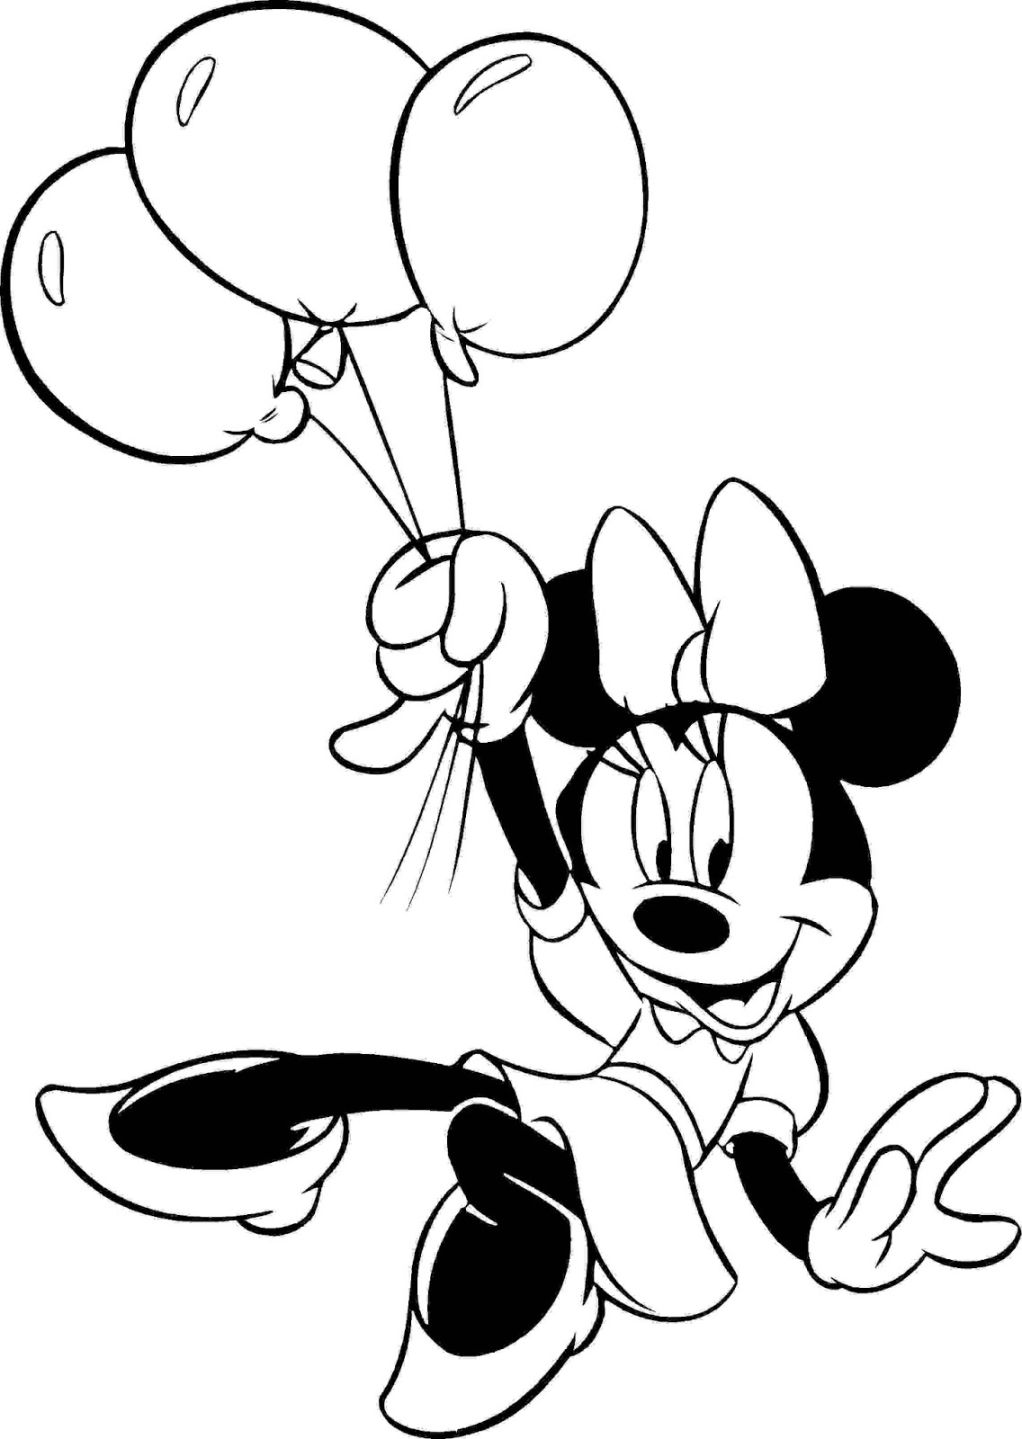 Happy Birthday Minnie Mouse Coloring Pages At GetDrawings Free Download